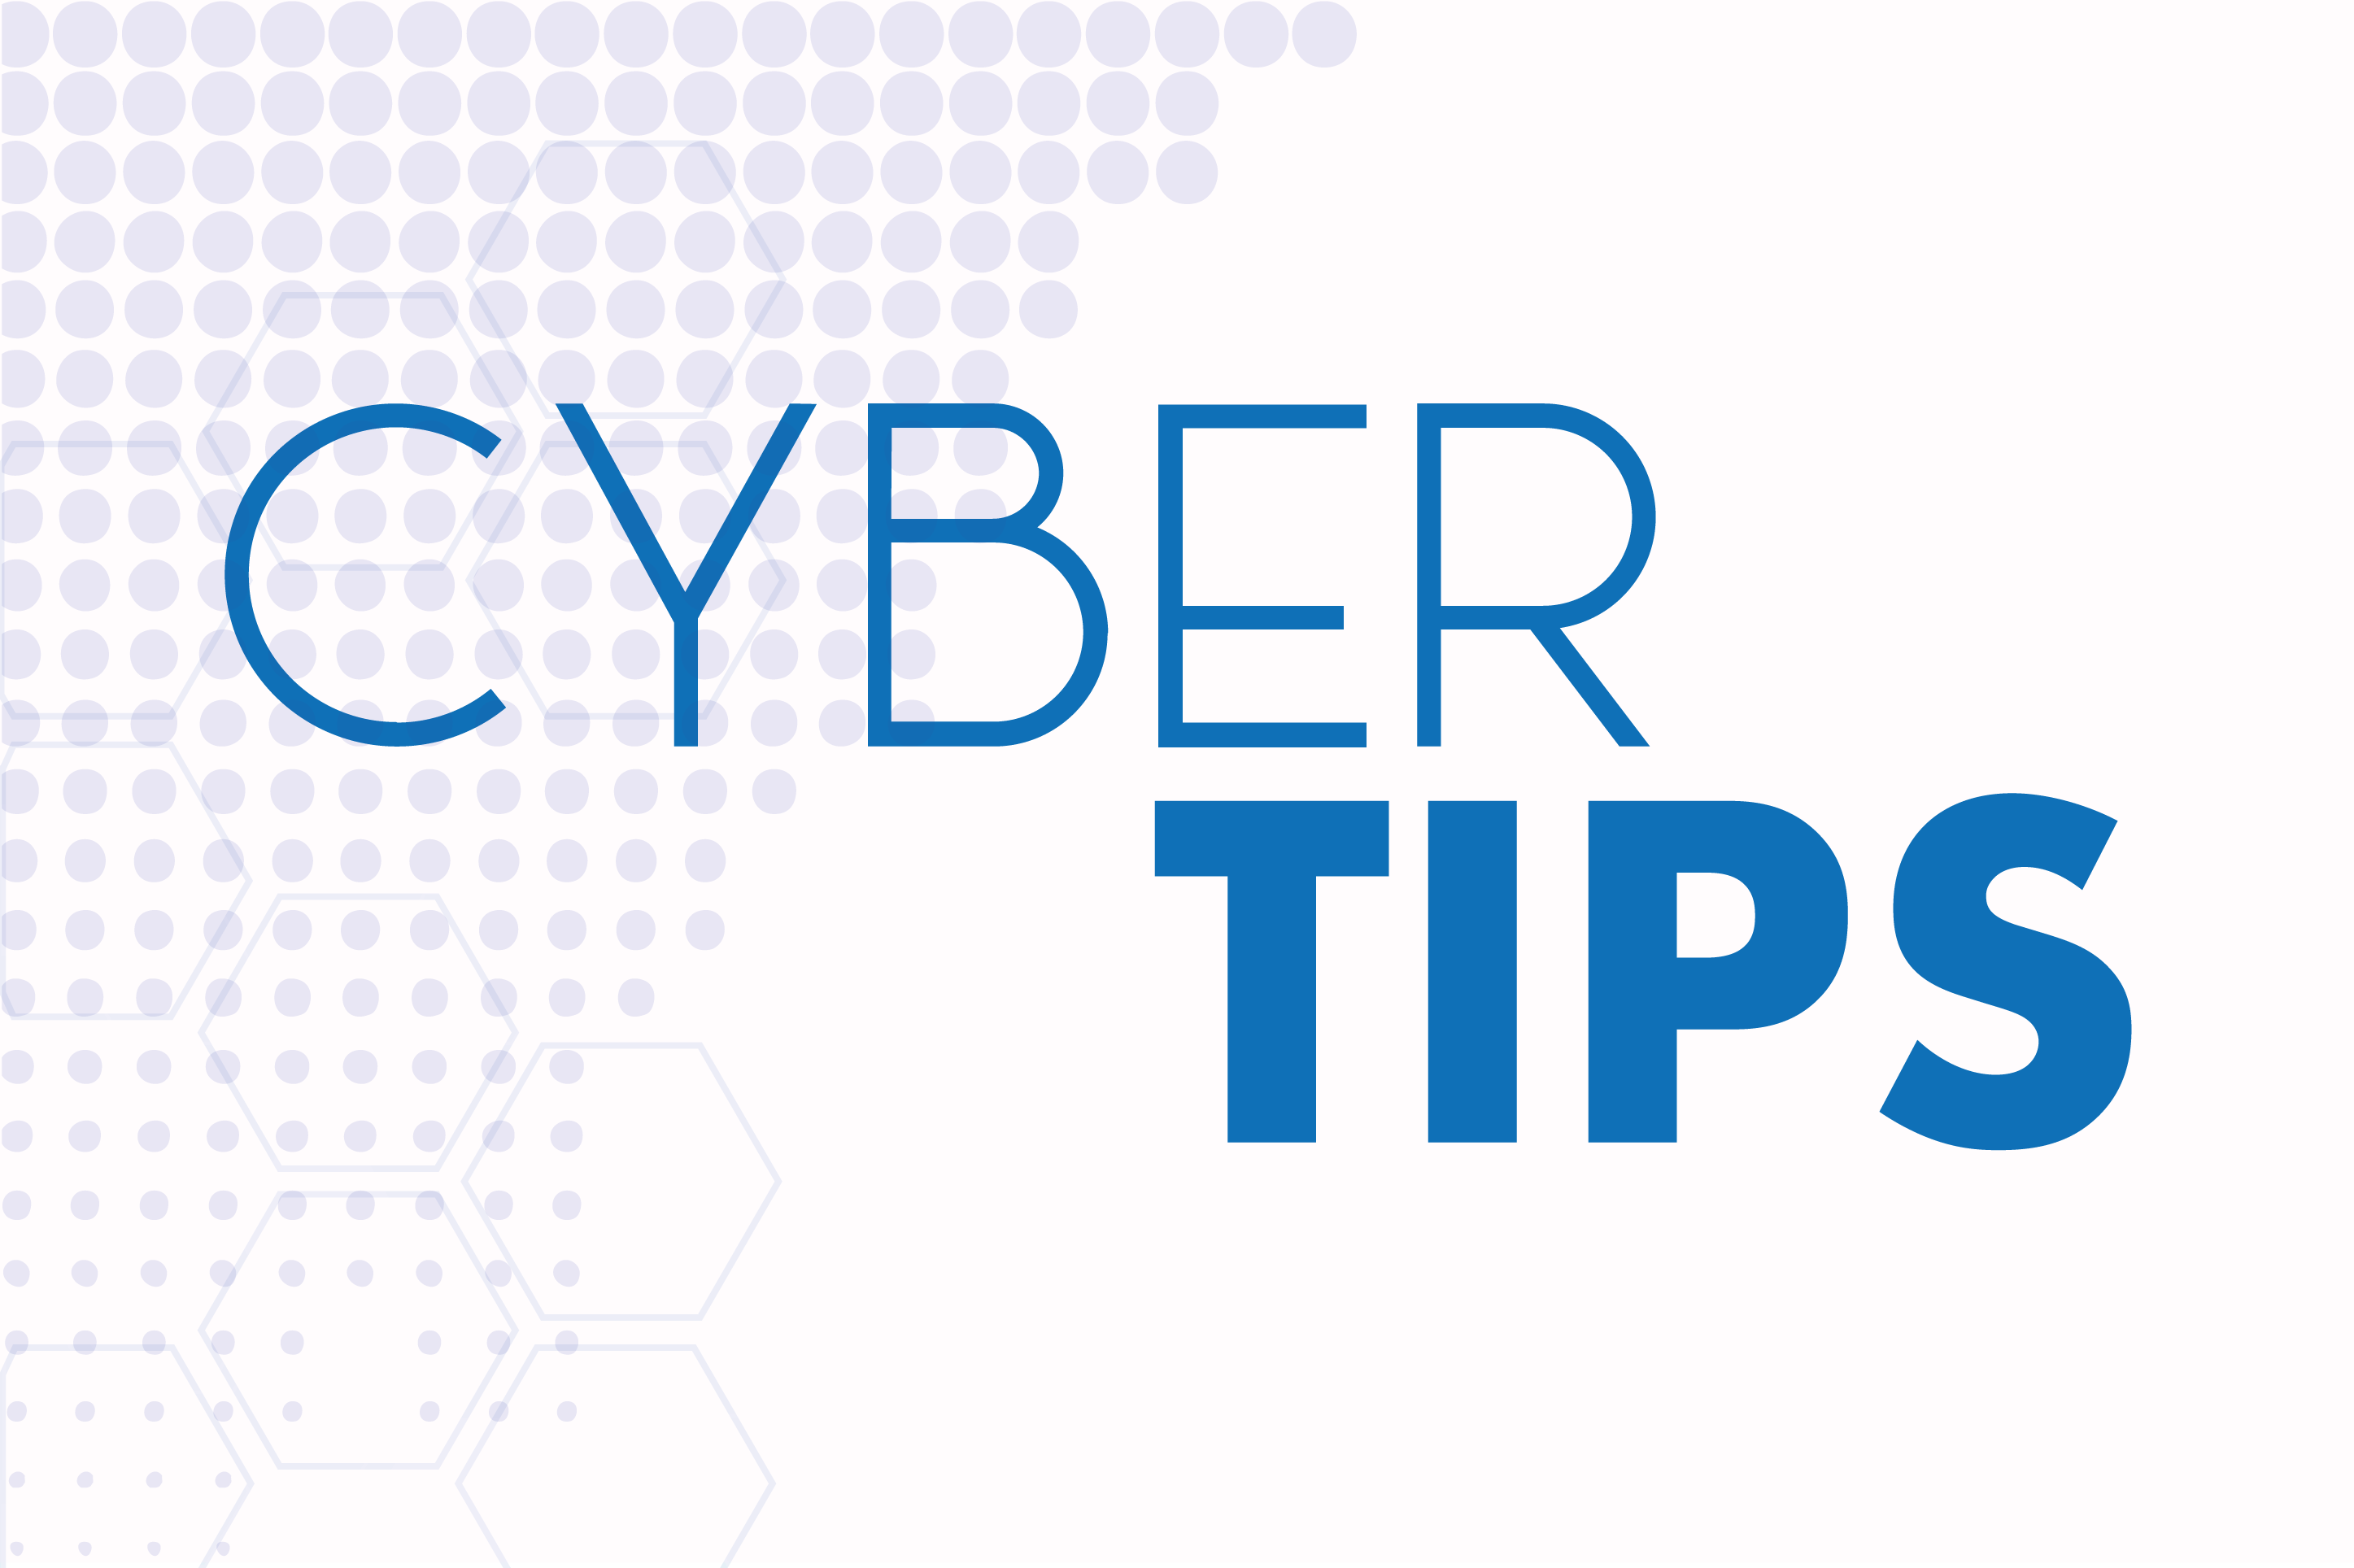 Hier download je cyber tips